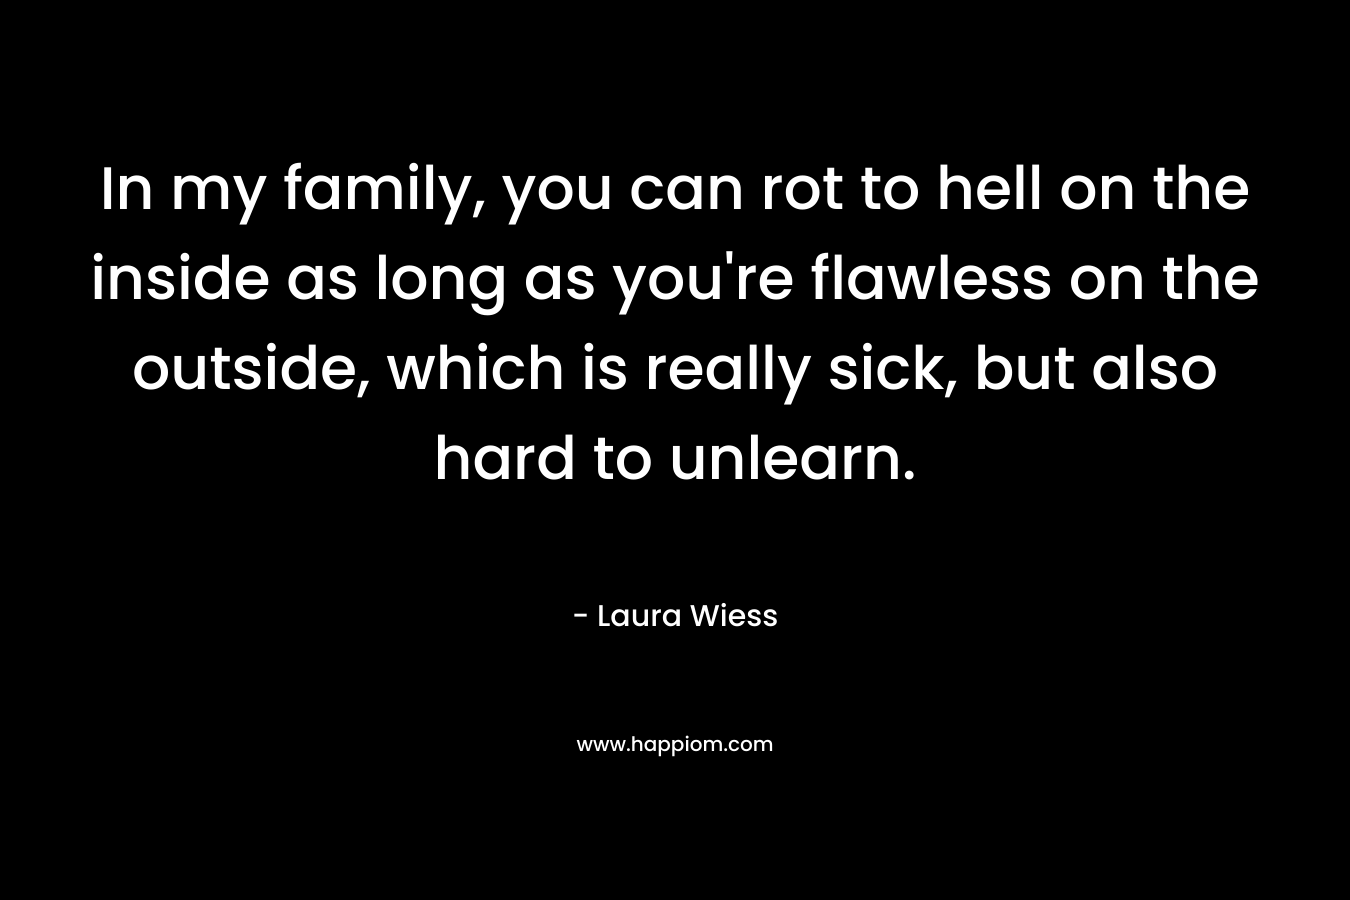 In my family, you can rot to hell on the inside as long as you're flawless on the outside, which is really sick, but also hard to unlearn.